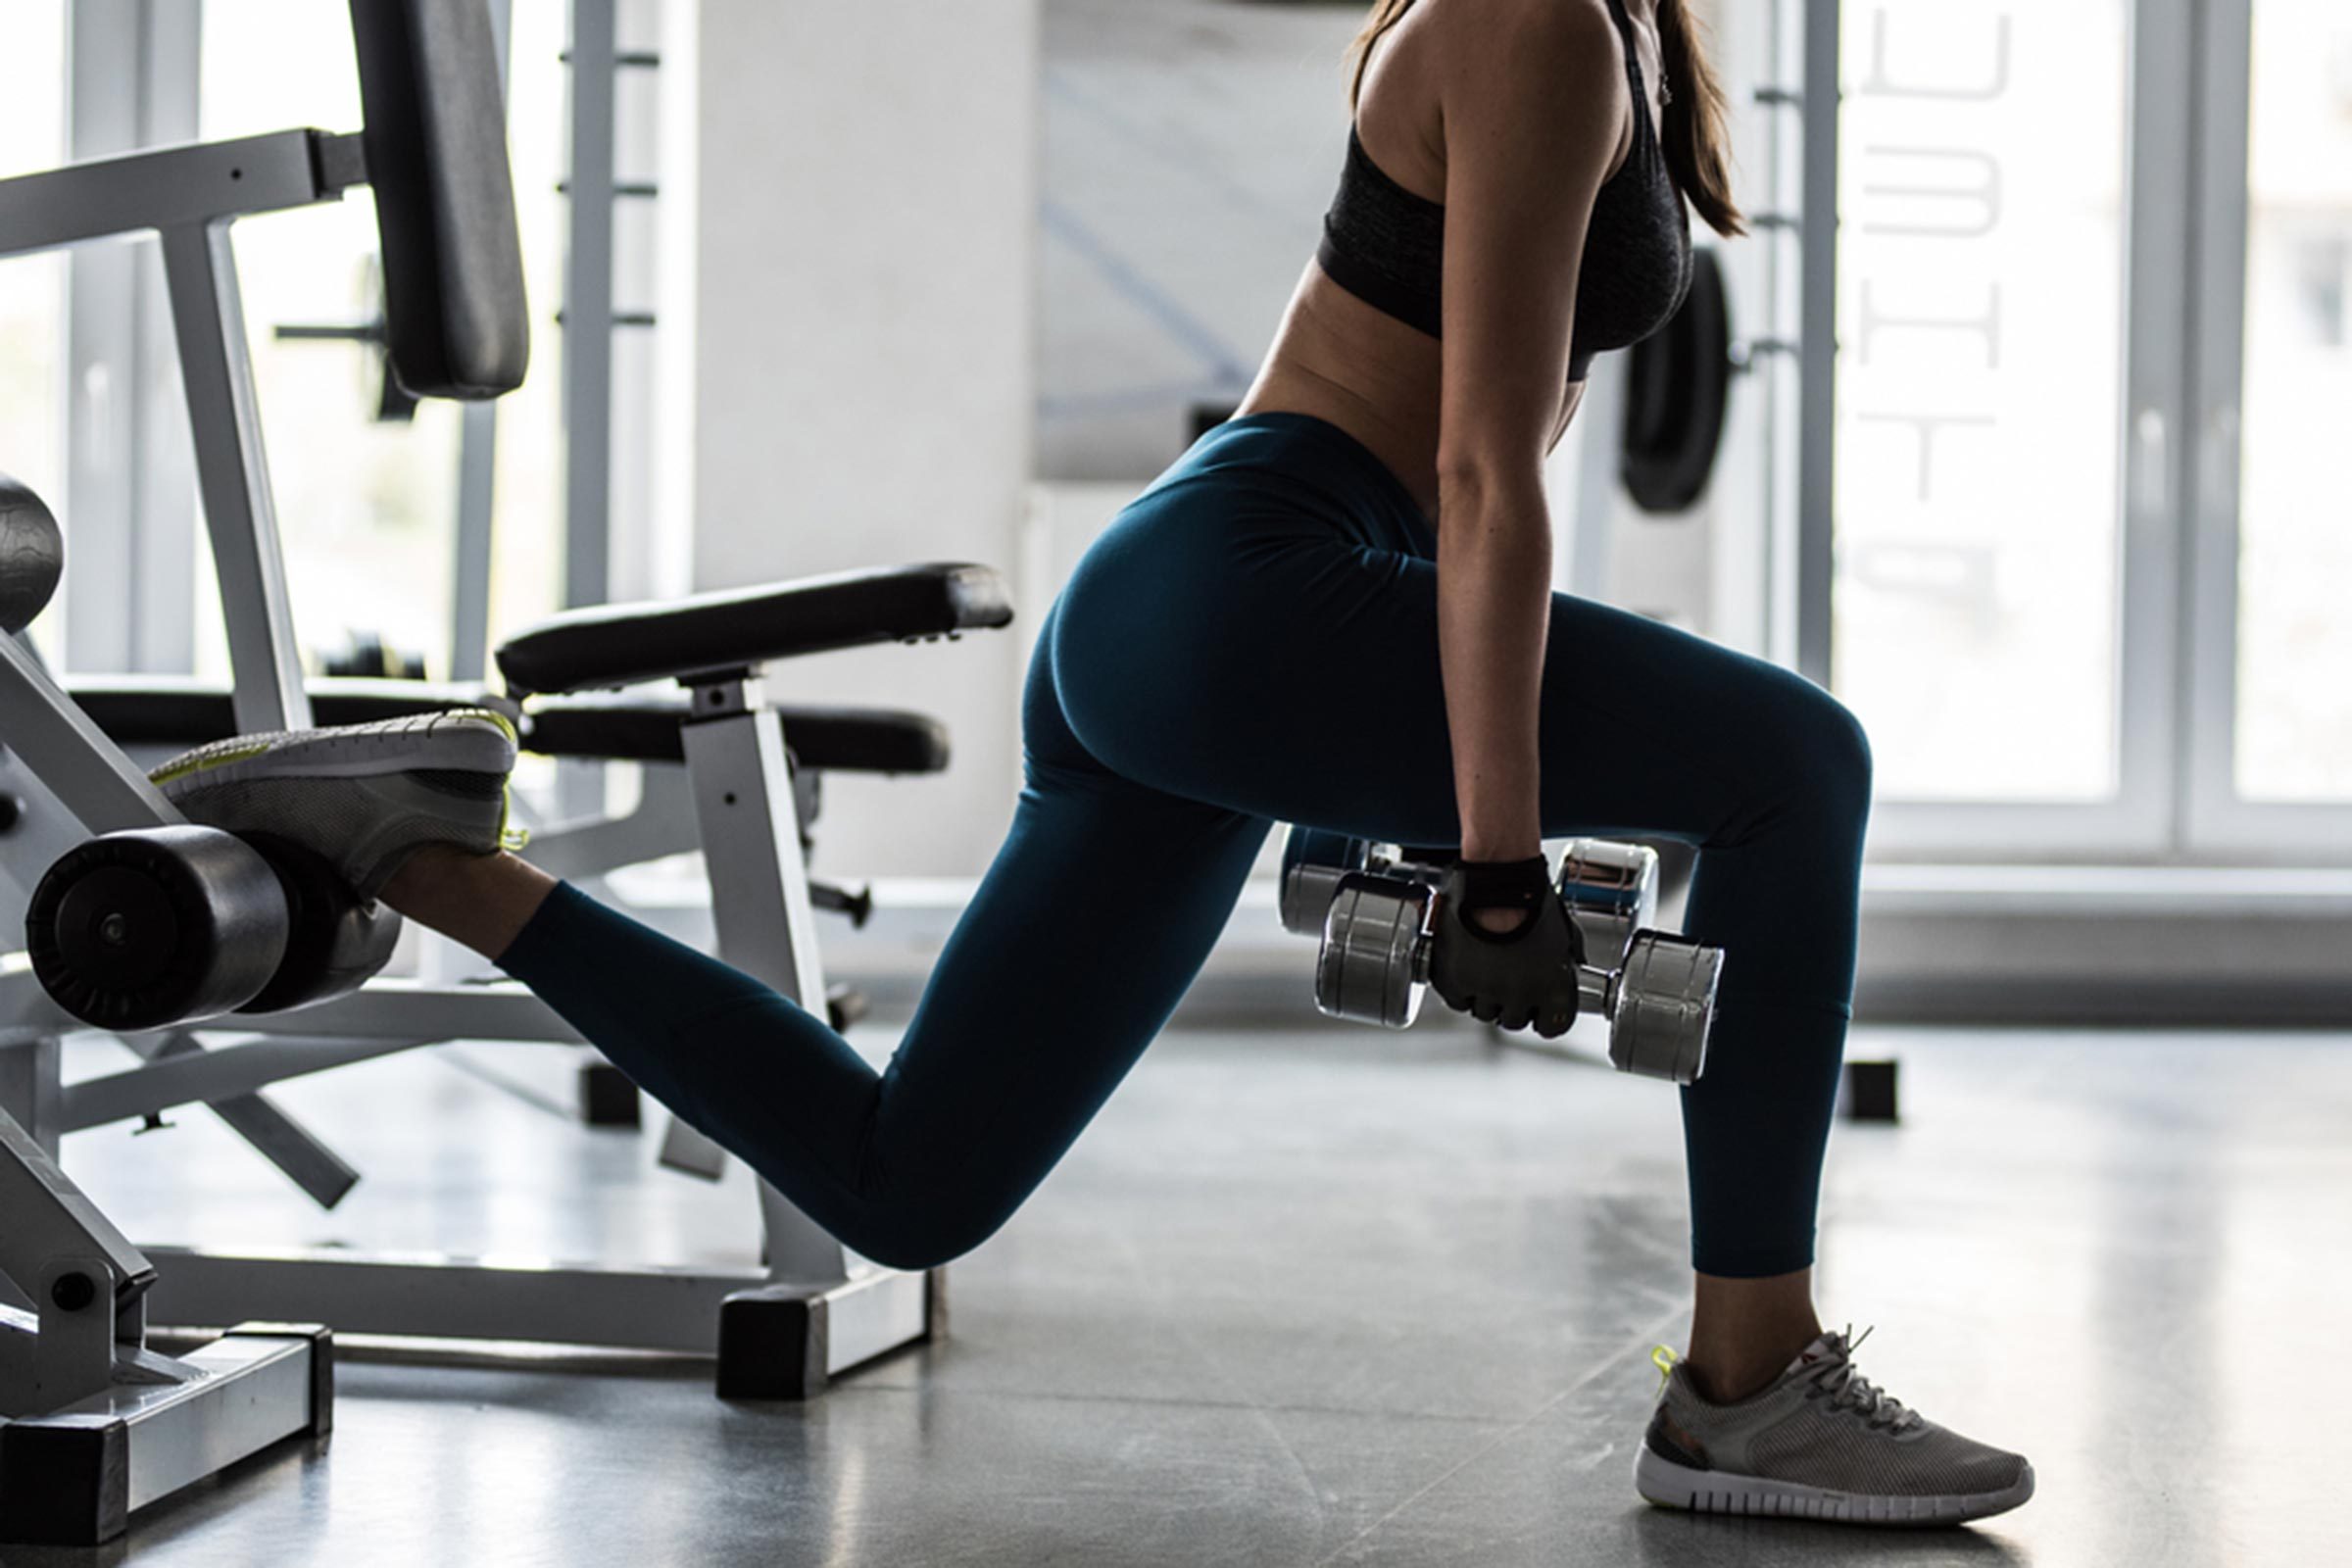 This Is the One Thing at the Gym That Could Save Your Life—and You Probably Have No Clue Where It Is